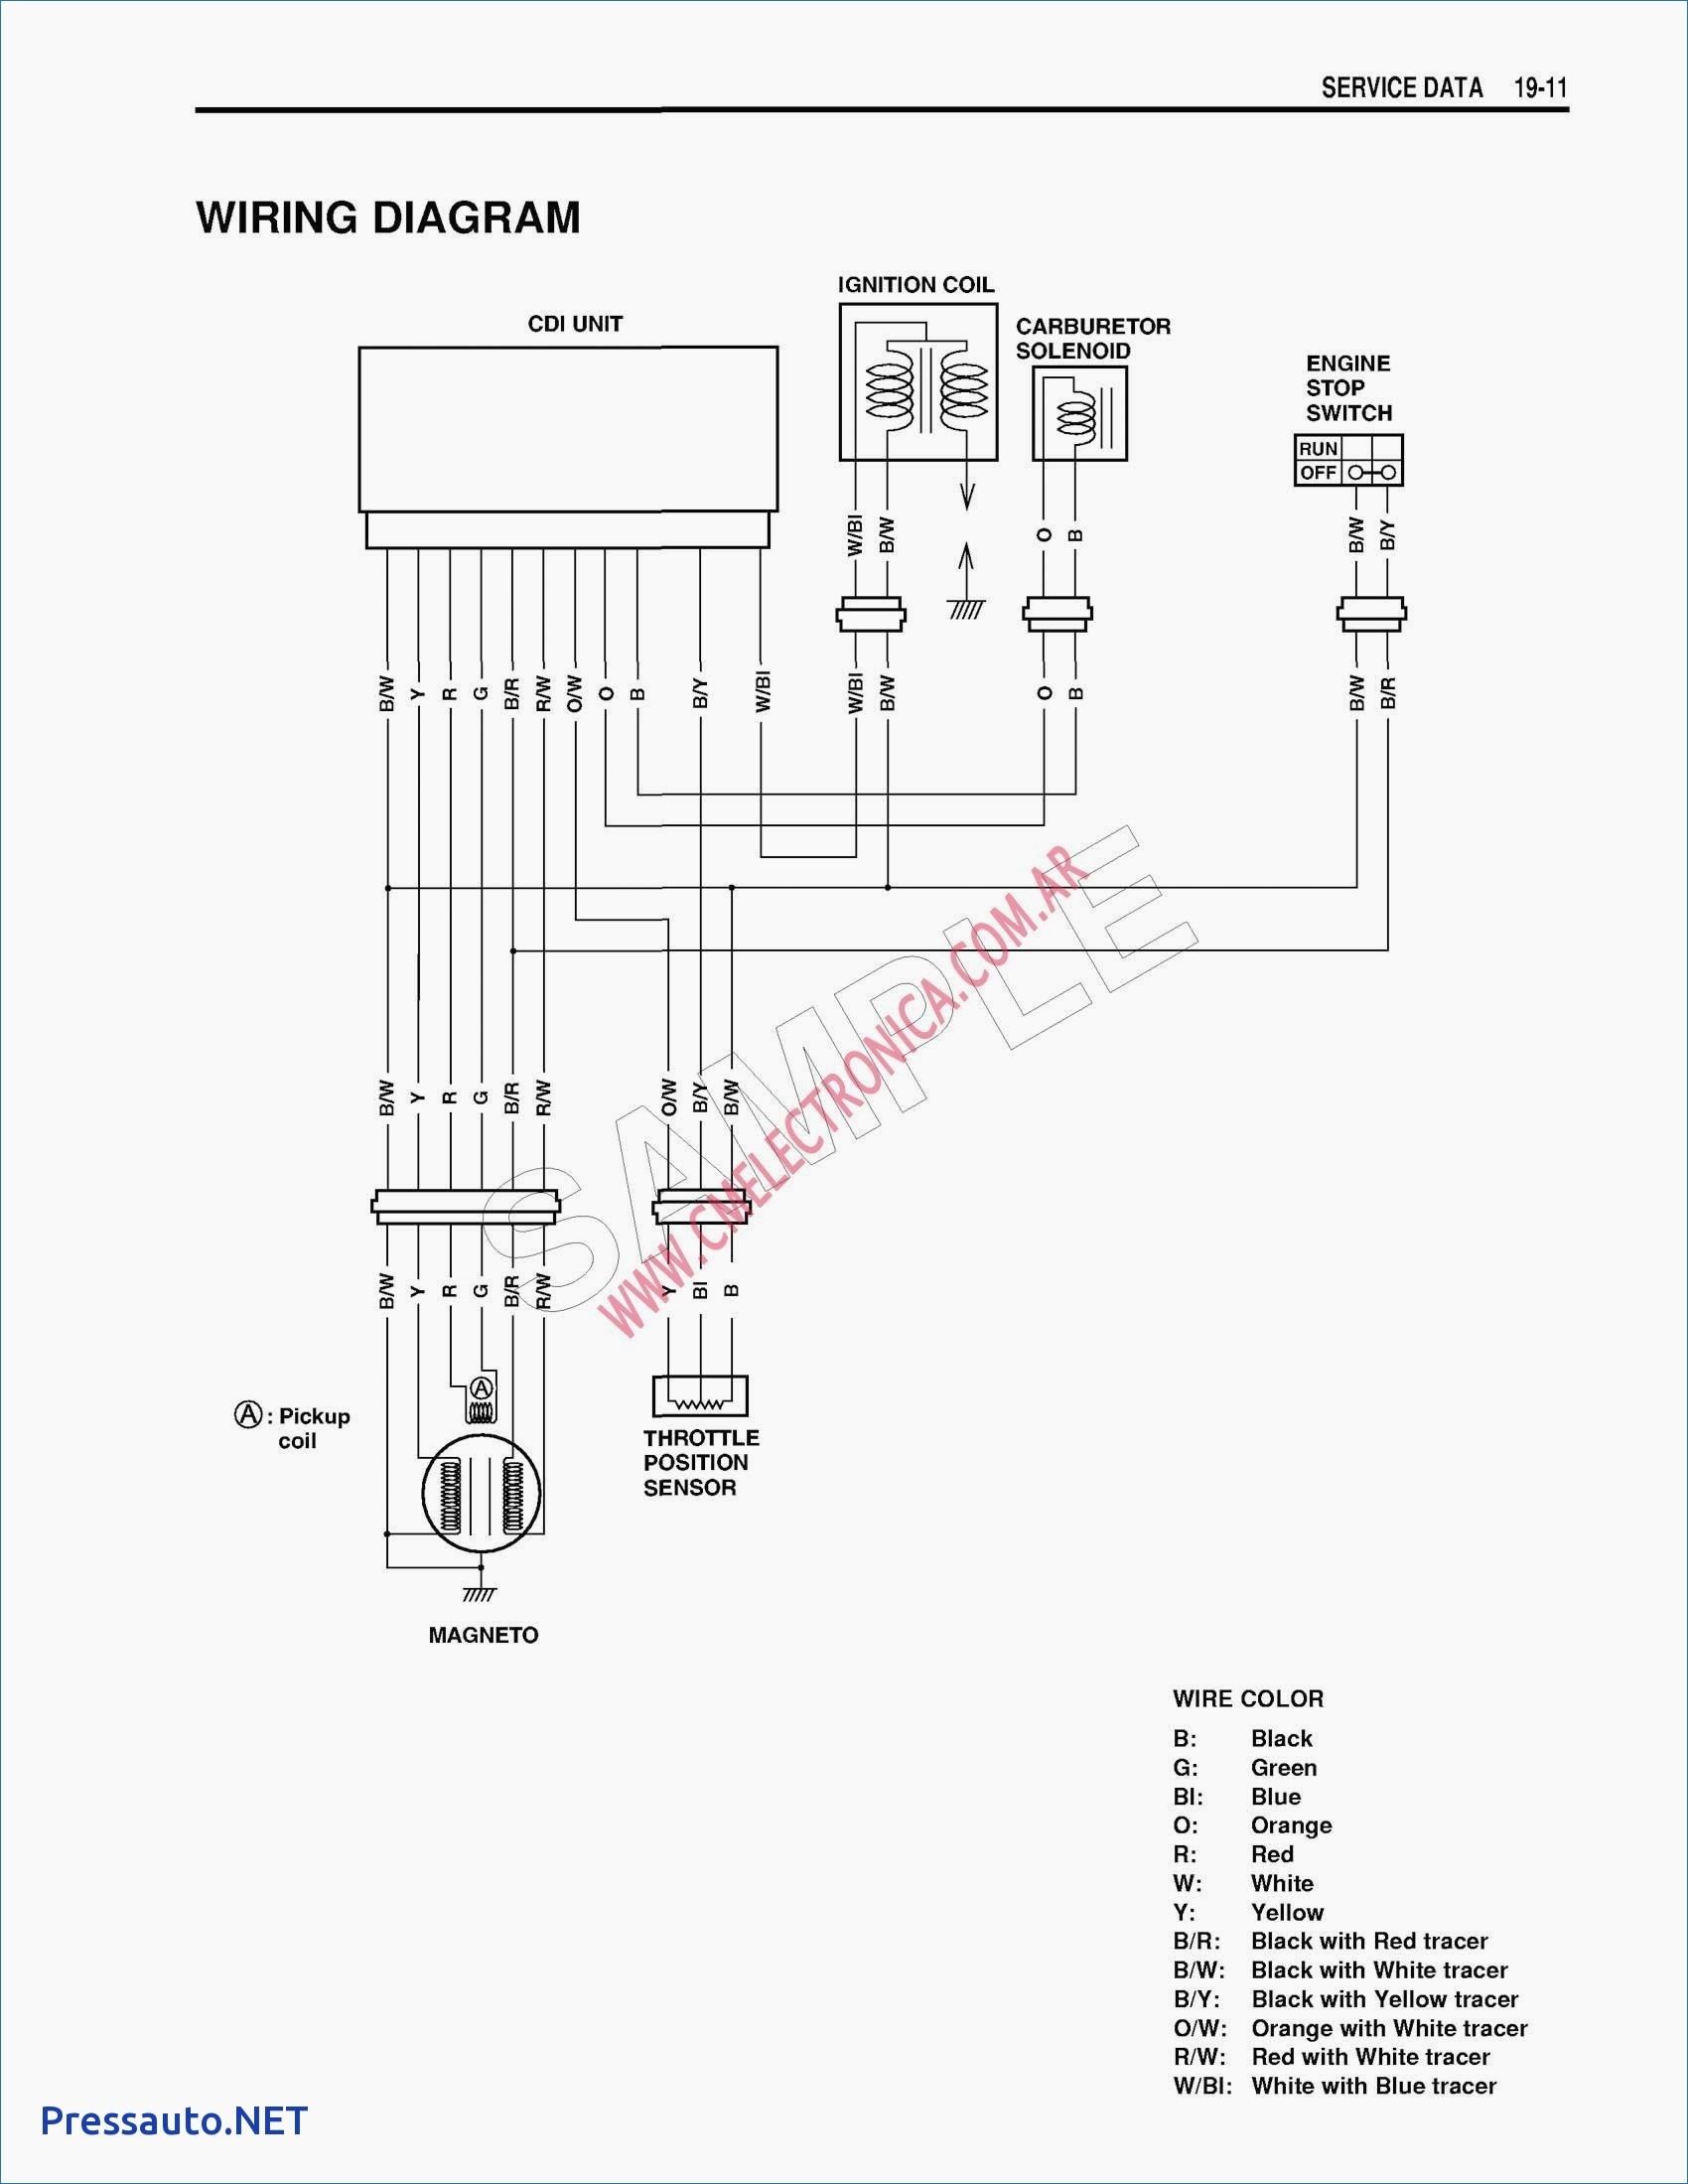 stunning dc 6 wire cdi box diagram gallery electrical and wiring rh chocaraze org Fuel Pump Wiring Harness Diagram Simple Wiring Diagrams